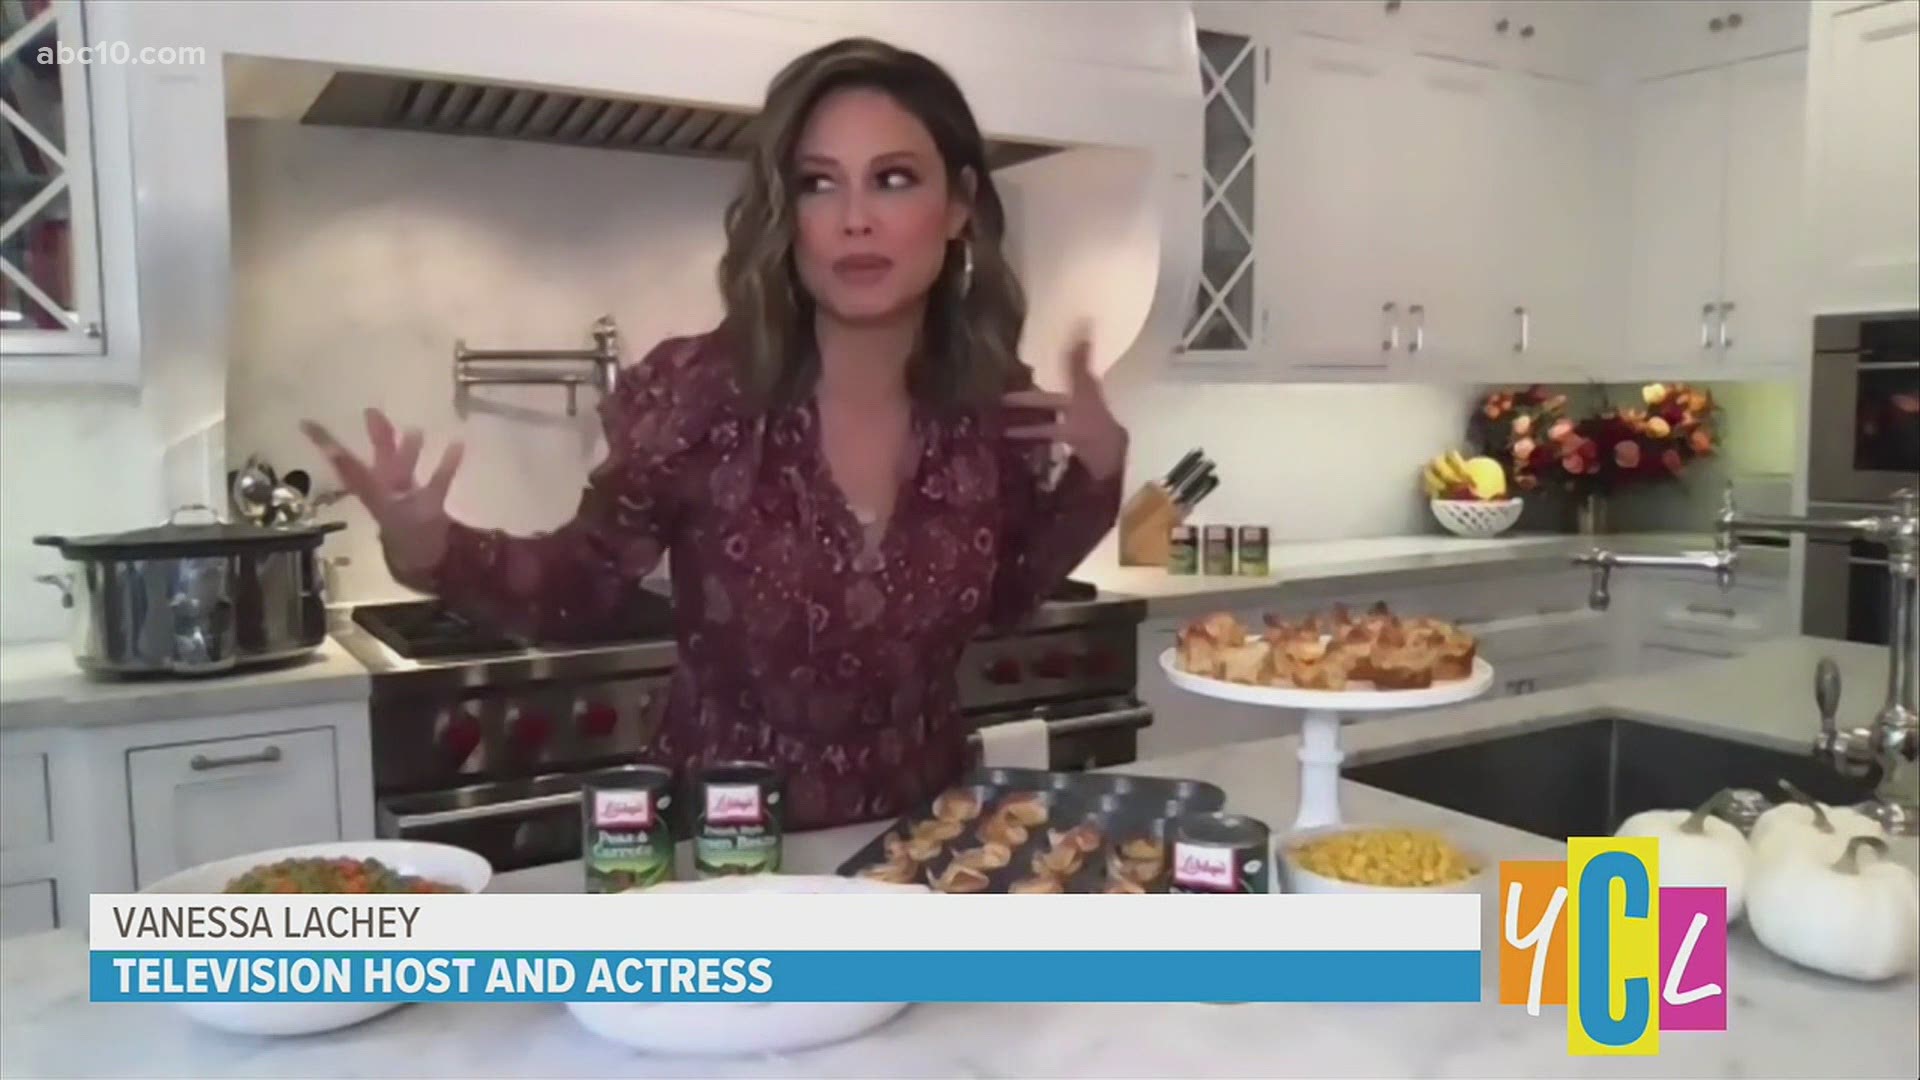 Vanessa Lachey tells YCL host Aubrey Aquino about her favorite holiday recipes for every type of family gathering and ways to support those in need this season.